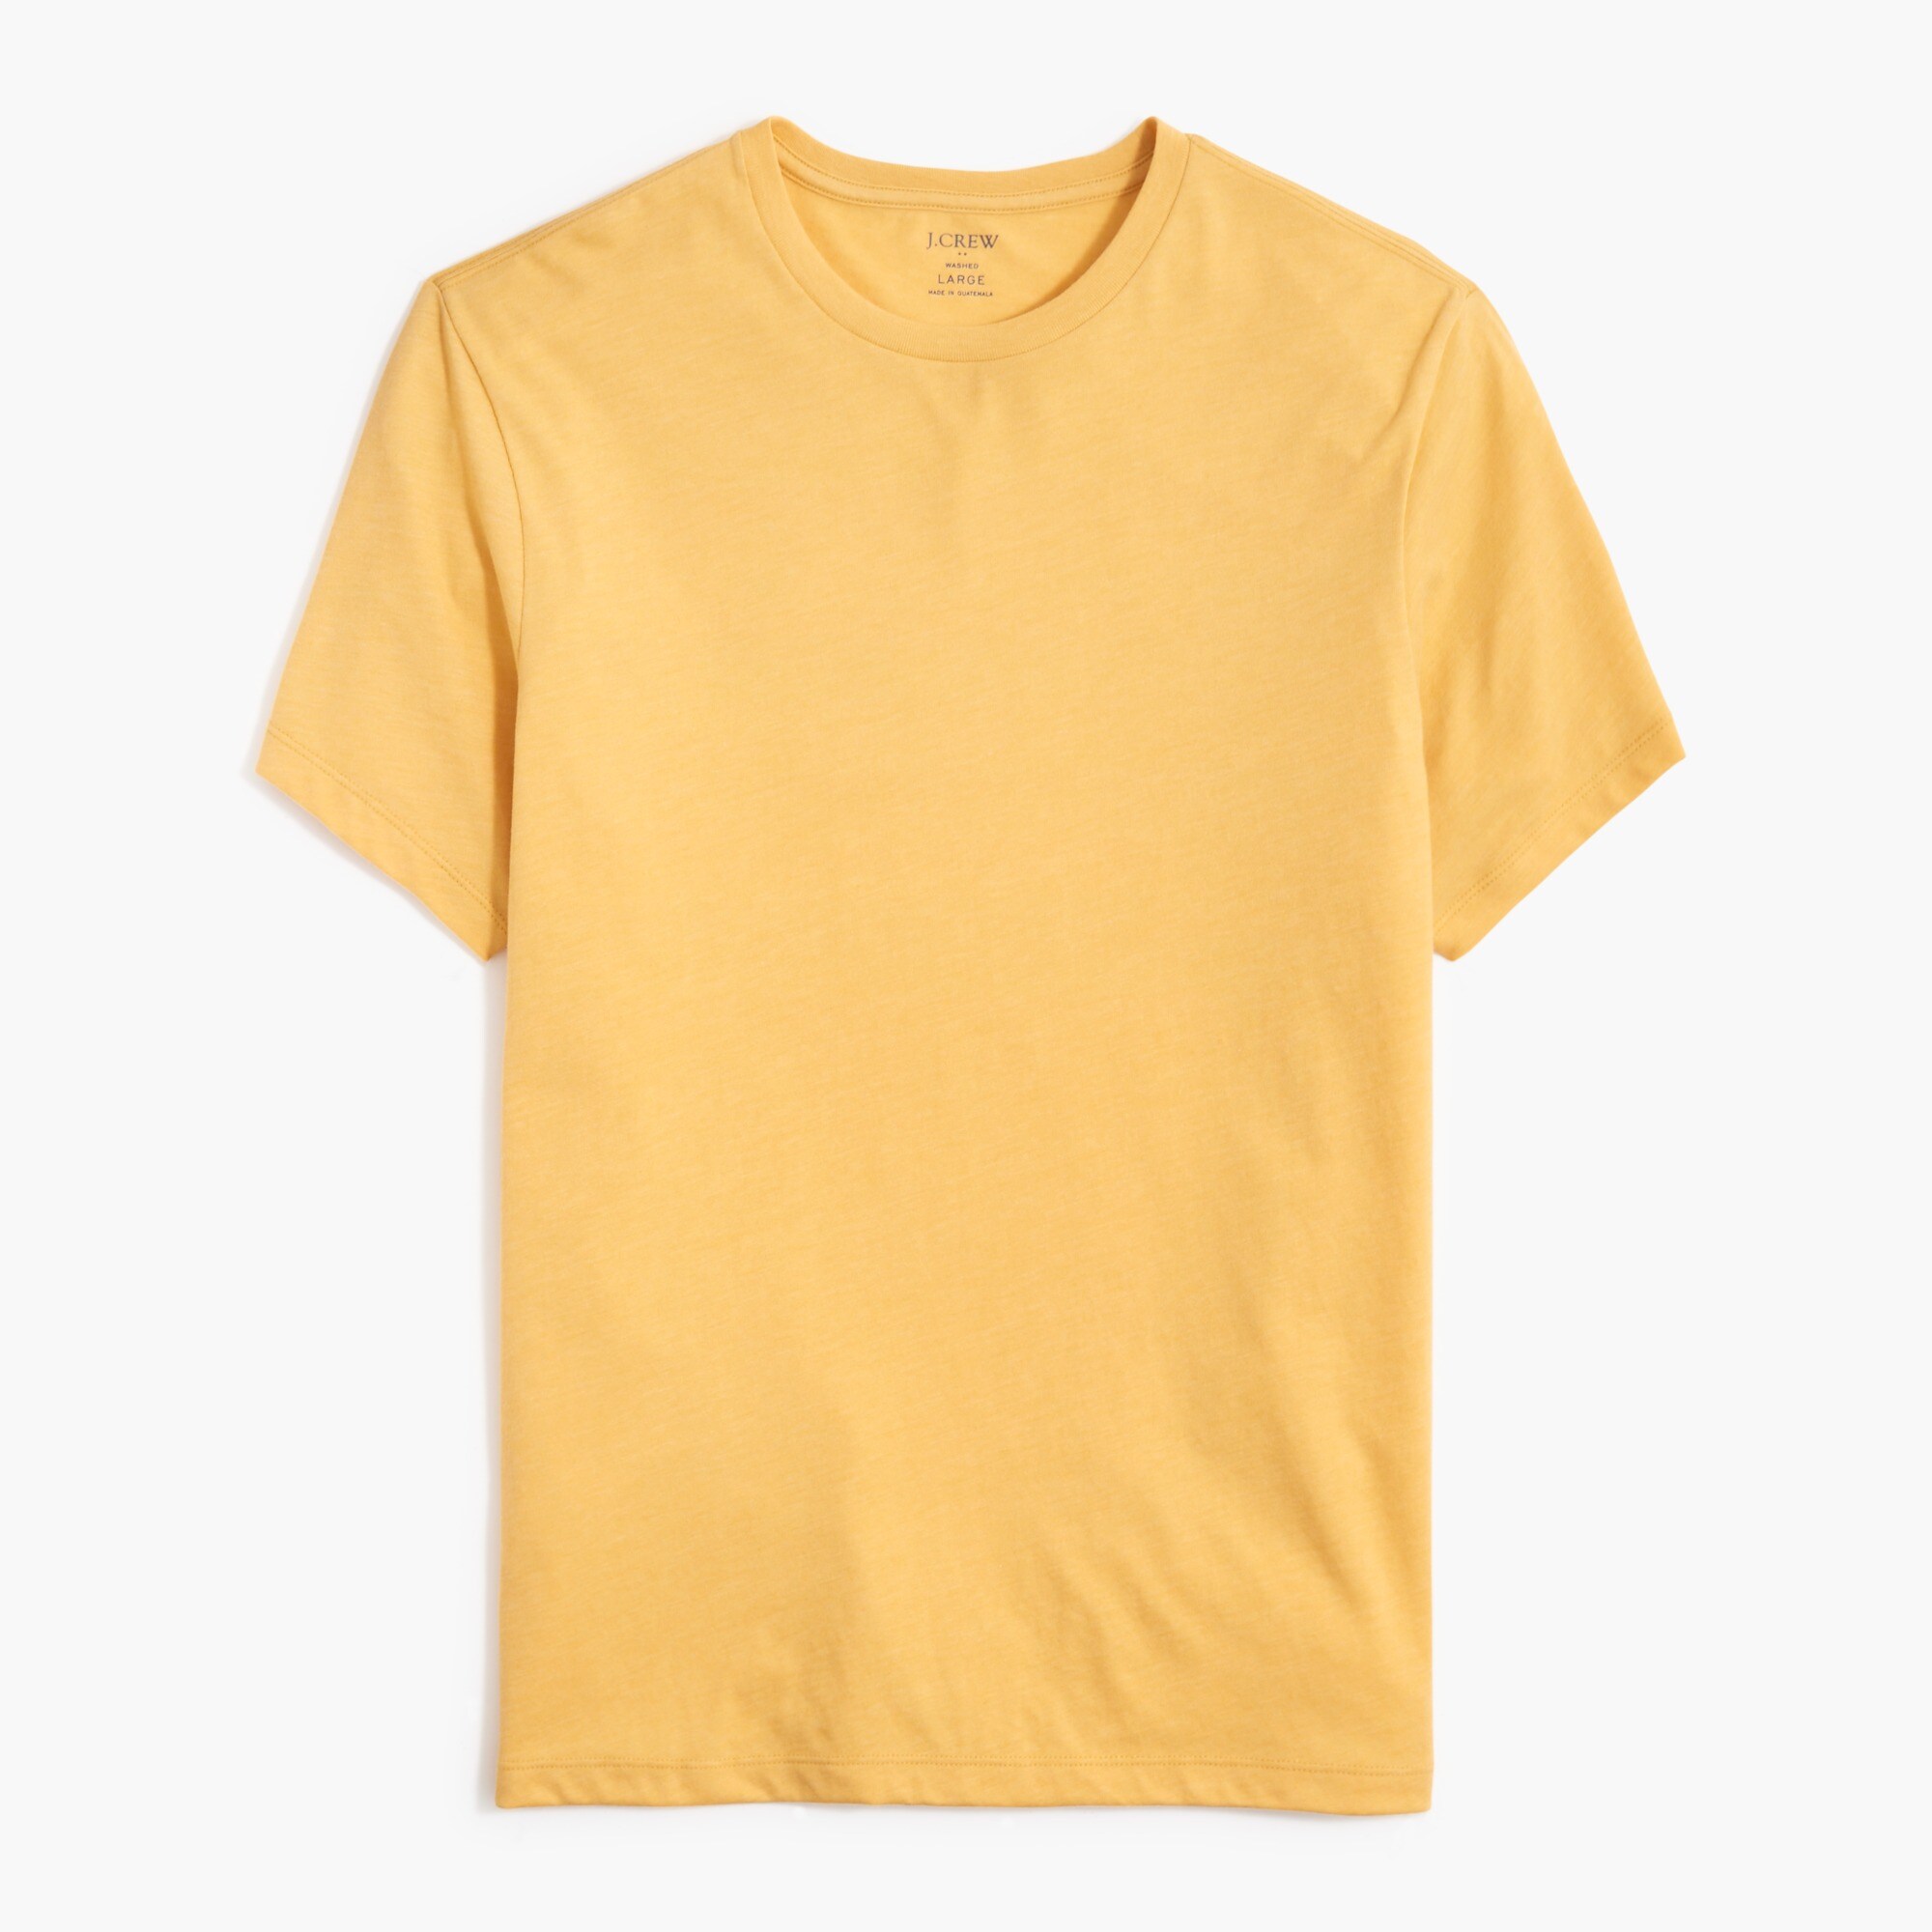  Washed jersey tee